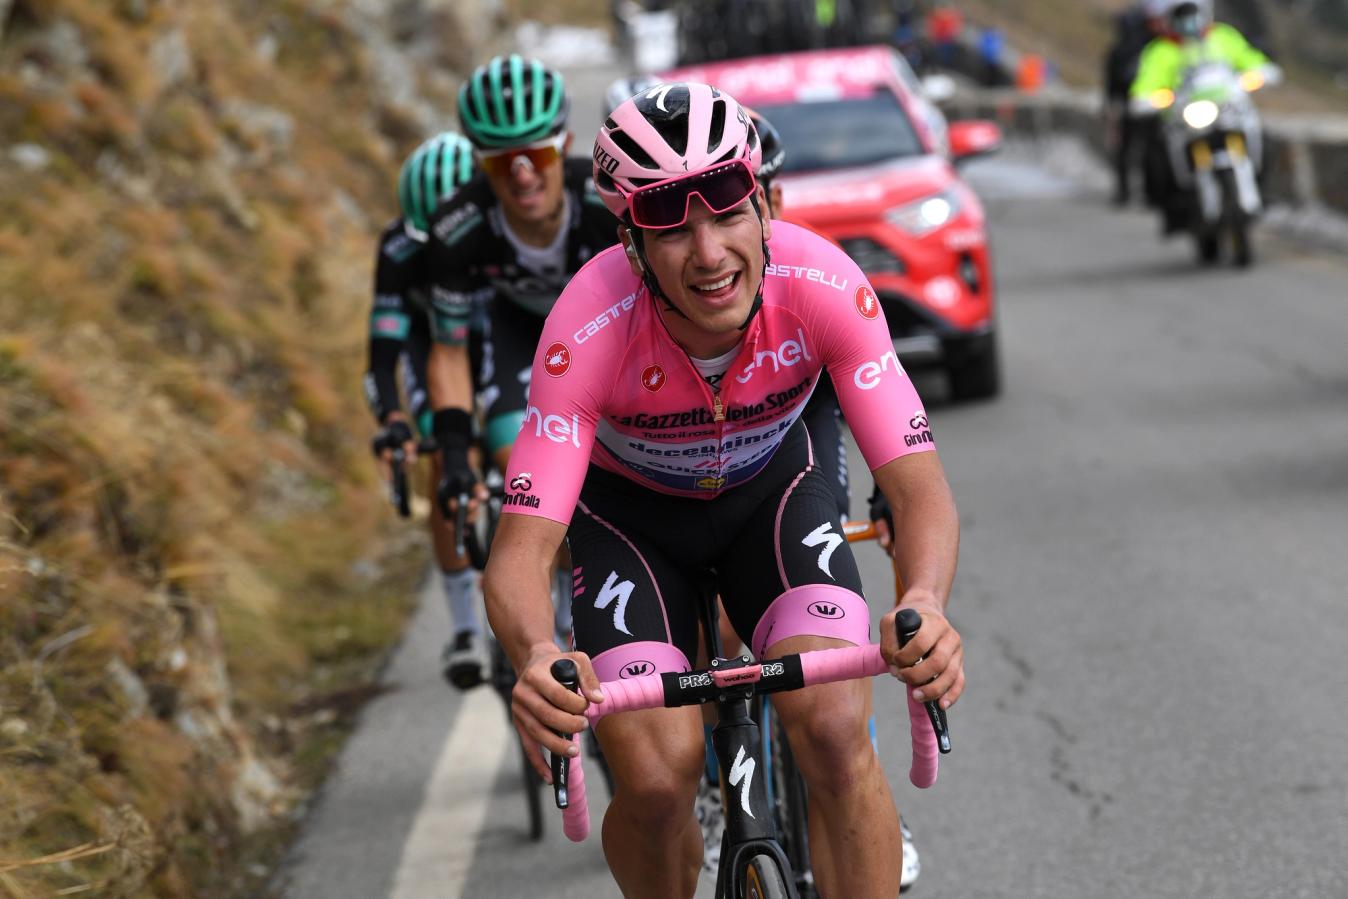 João Almeida's performance at the 2020 Giro d'Italia may have been overshadowed by the duel between Jai Hindley and Tao Geoghegan Hart in the final days, but it was truly one of the best Grand Tour debuts in recent memory